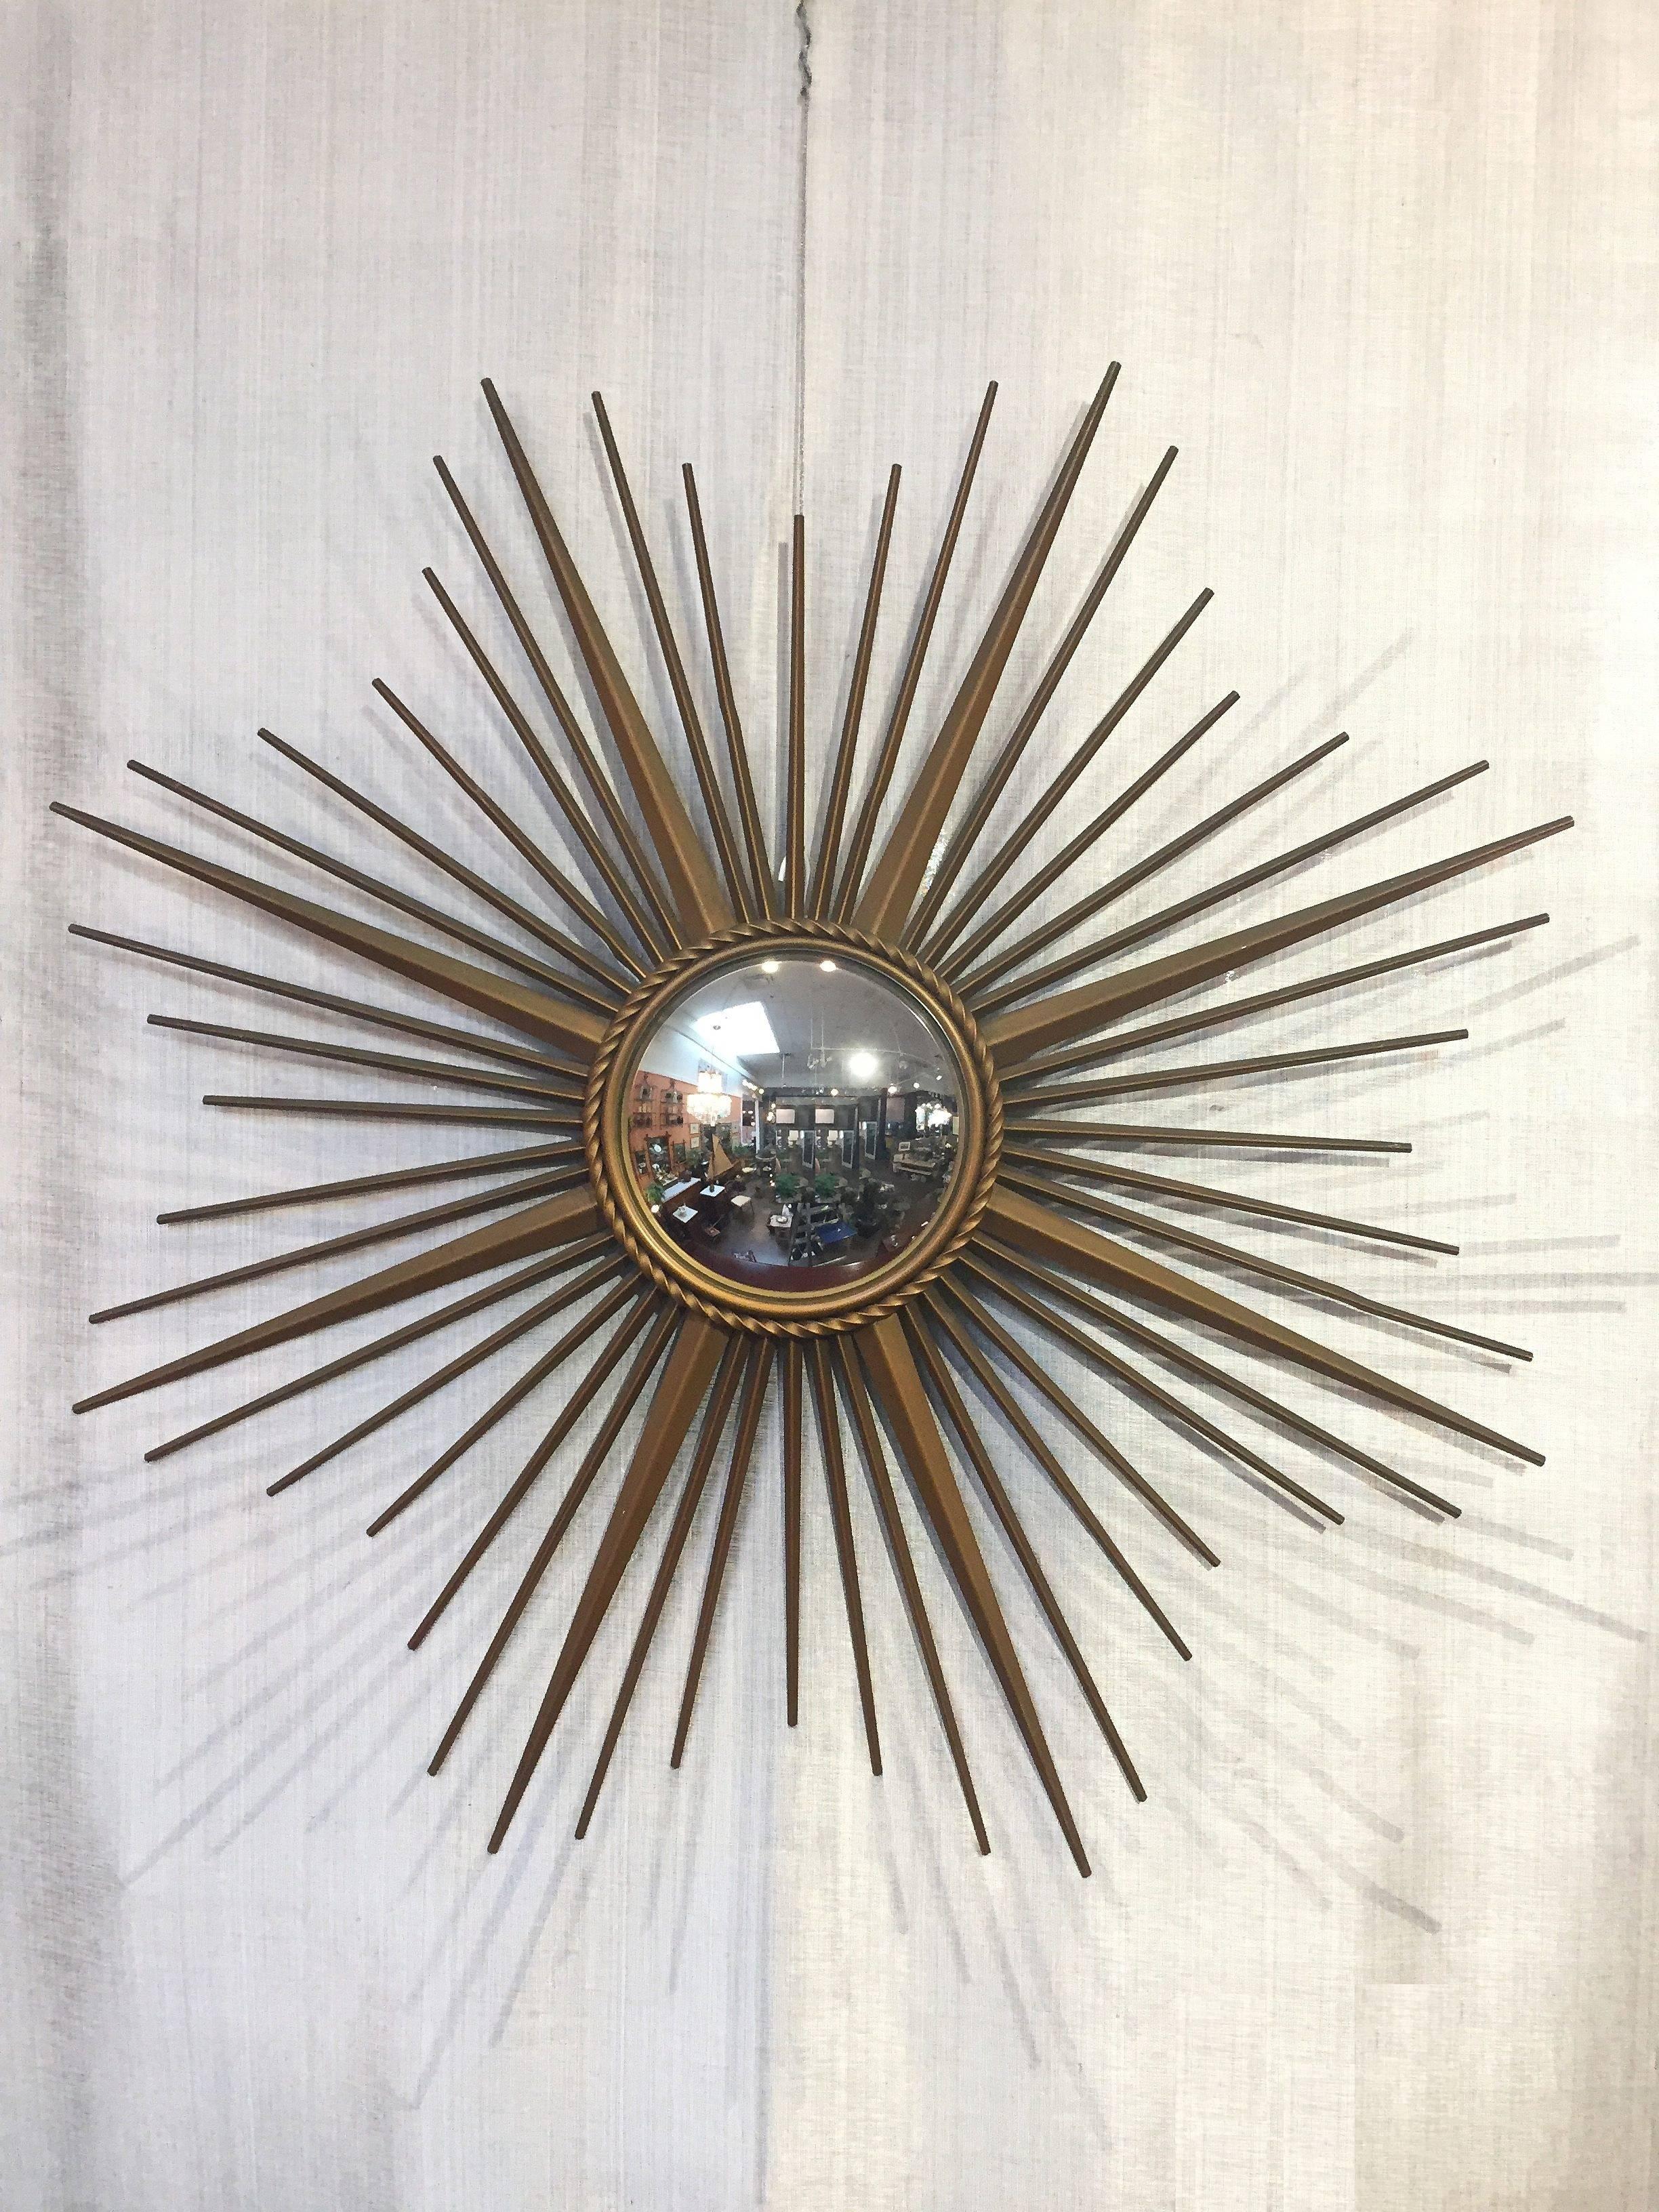 A fine French gilt metal sunburst (or starburst) mirror, 33.5 inches diameter, with convex mirrored glass center in moulded frame with rope motif trim by Chaty Vallauris.

With impressed mark of maker on back.

The Chaty Vallauris starburst or